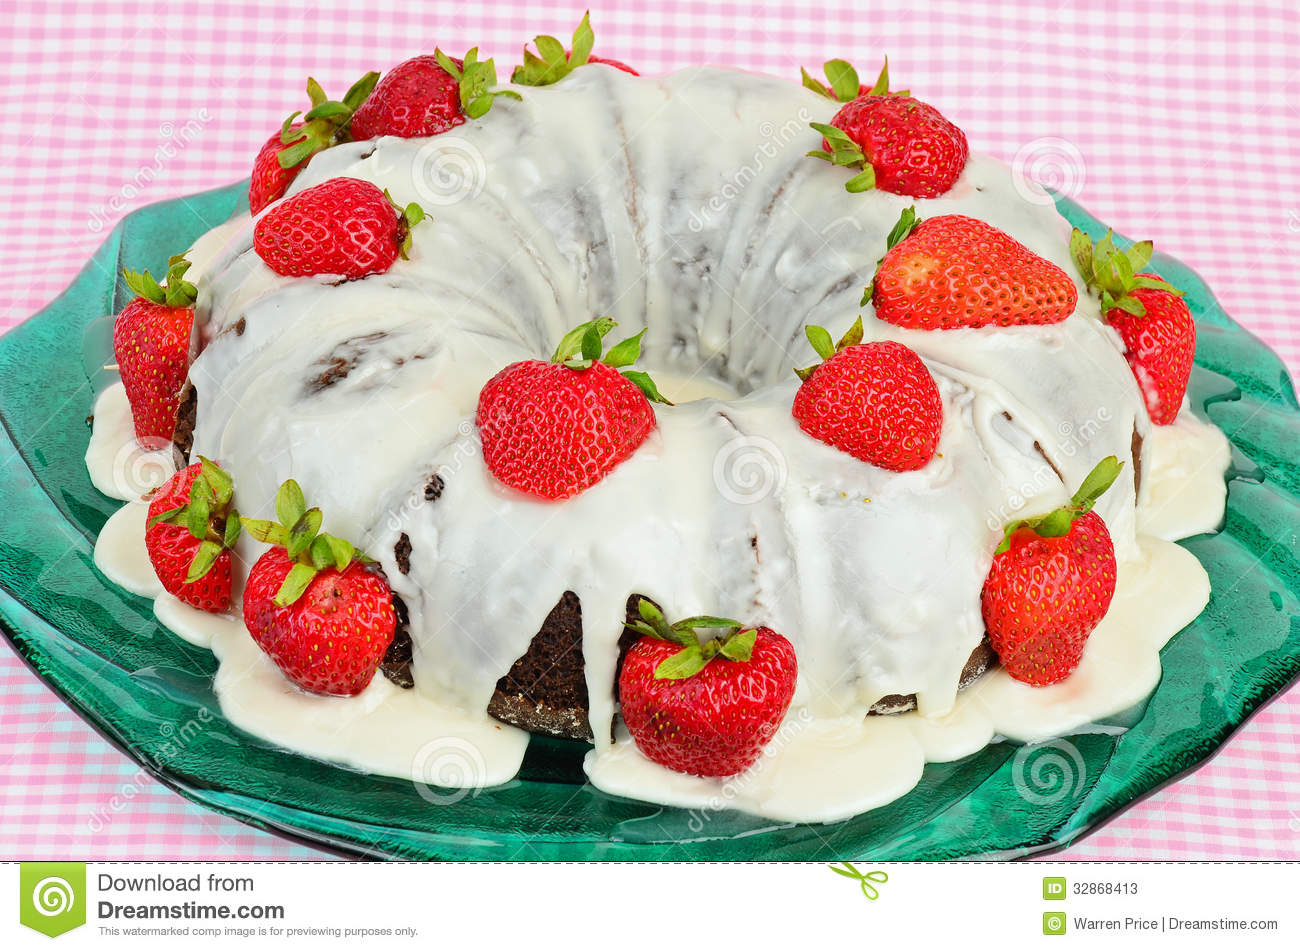 Decorated Bundt Cake with Strawberries